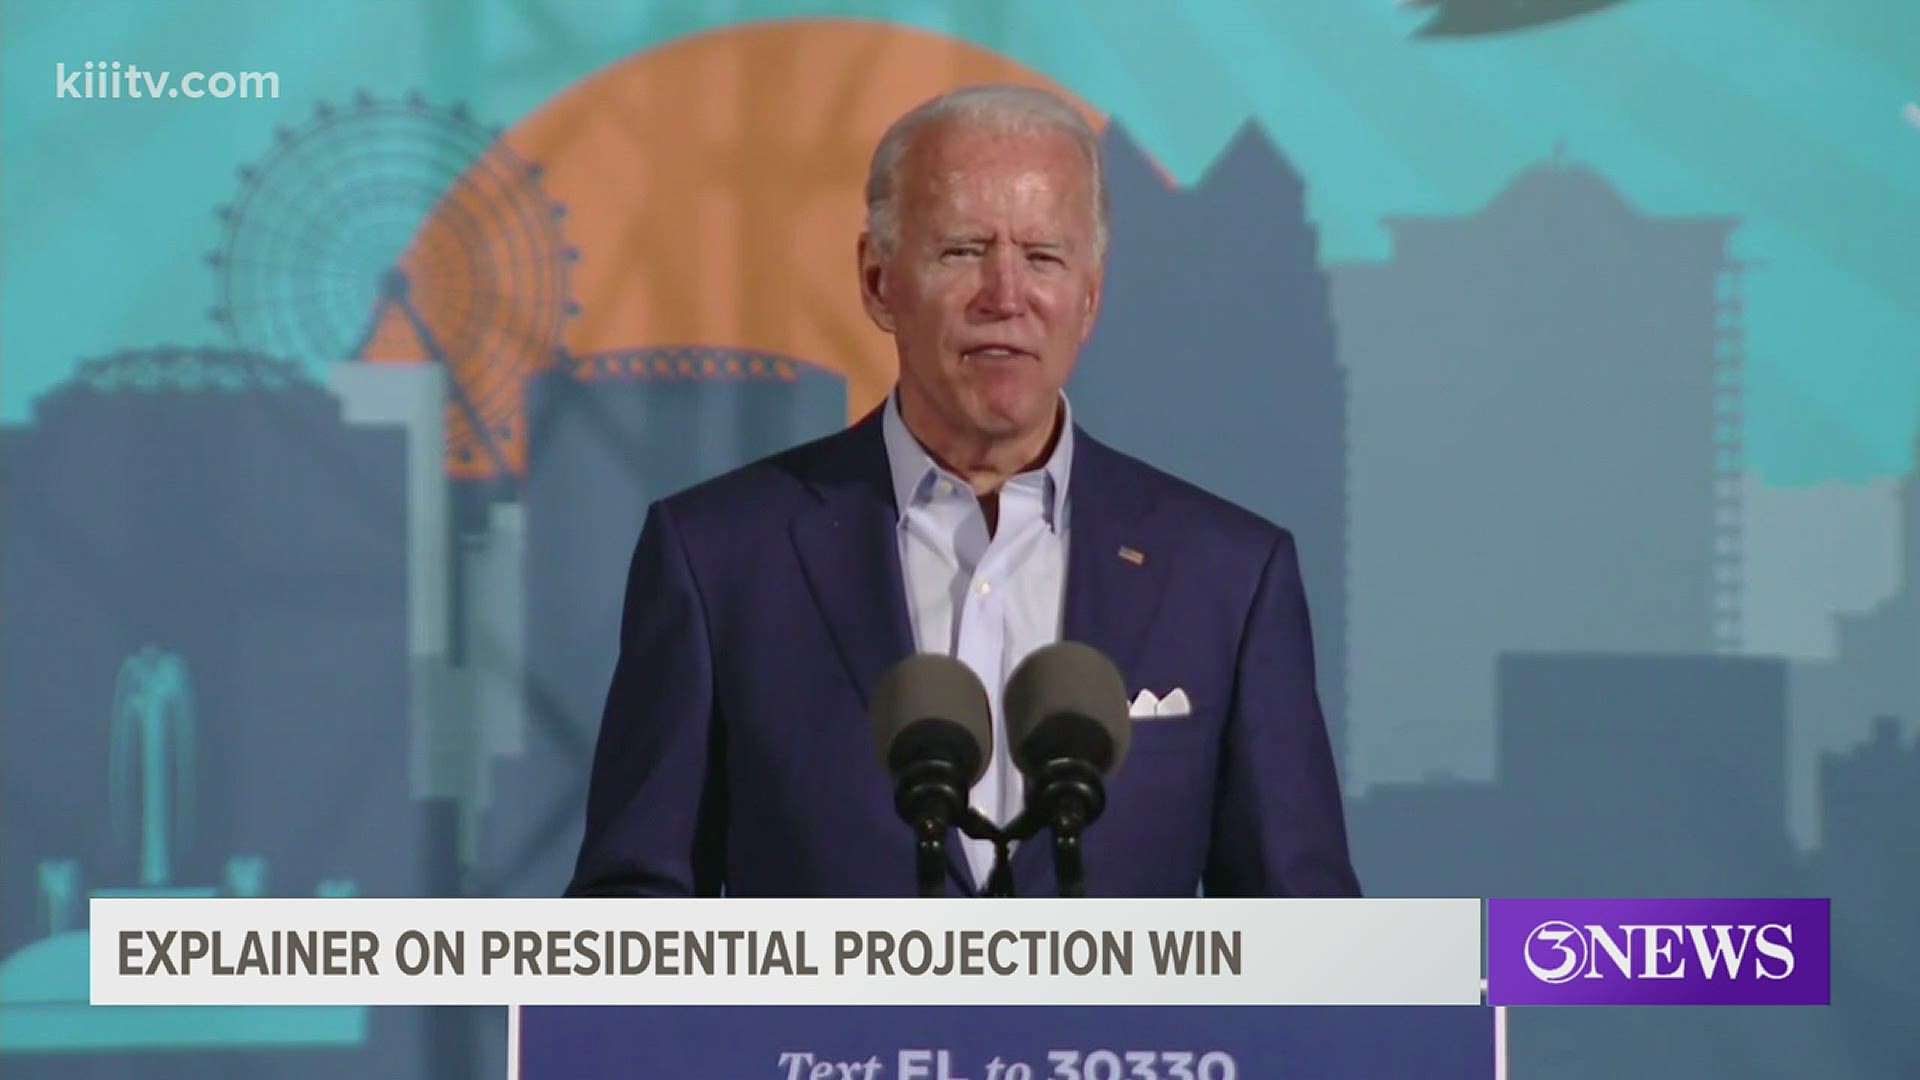 Questions remain about how major networks were able to project that most battleground states were won by Biden even though votes are still being counted.